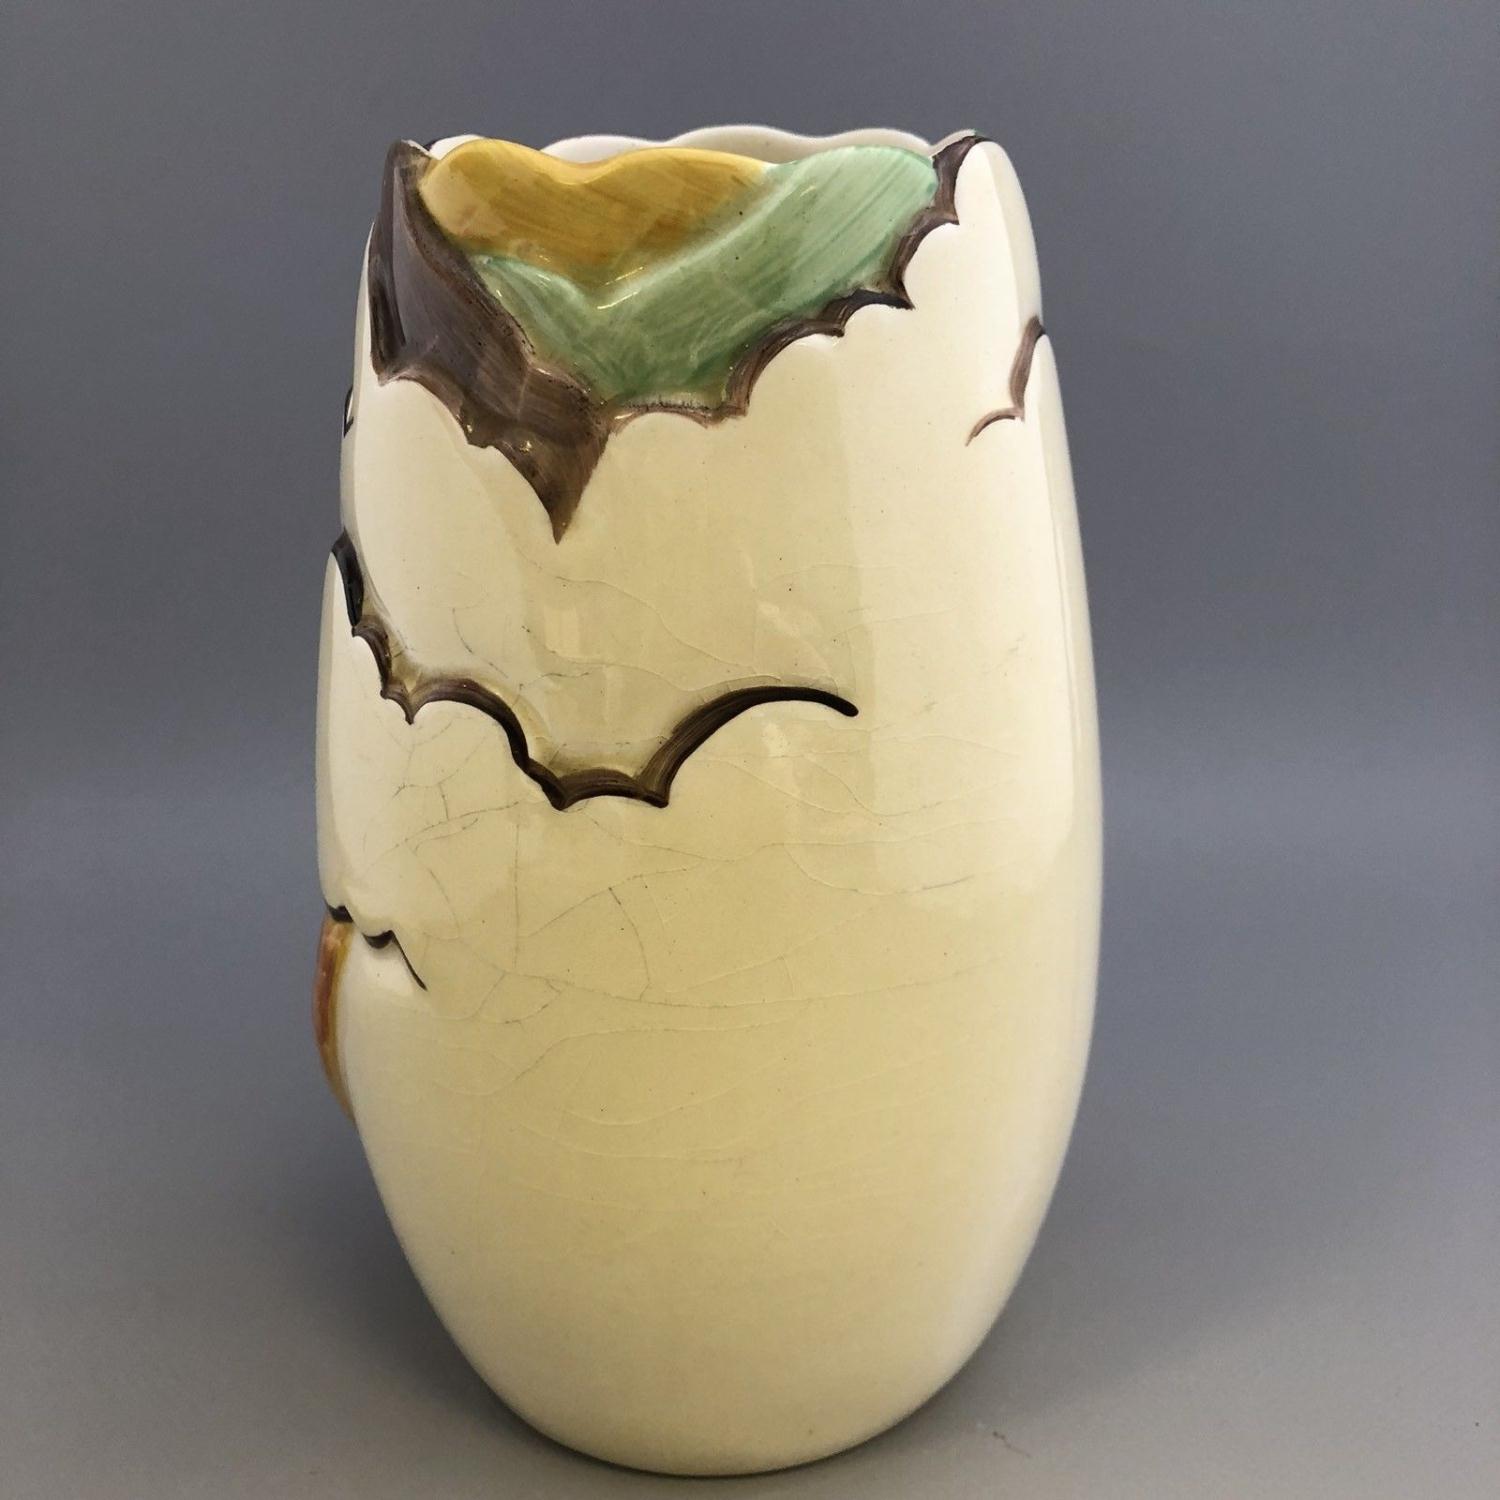 Clarice Cliff Newport Pottery Vase Chestnut Pattern Relief Decorated with Leaves - Image 3 of 7